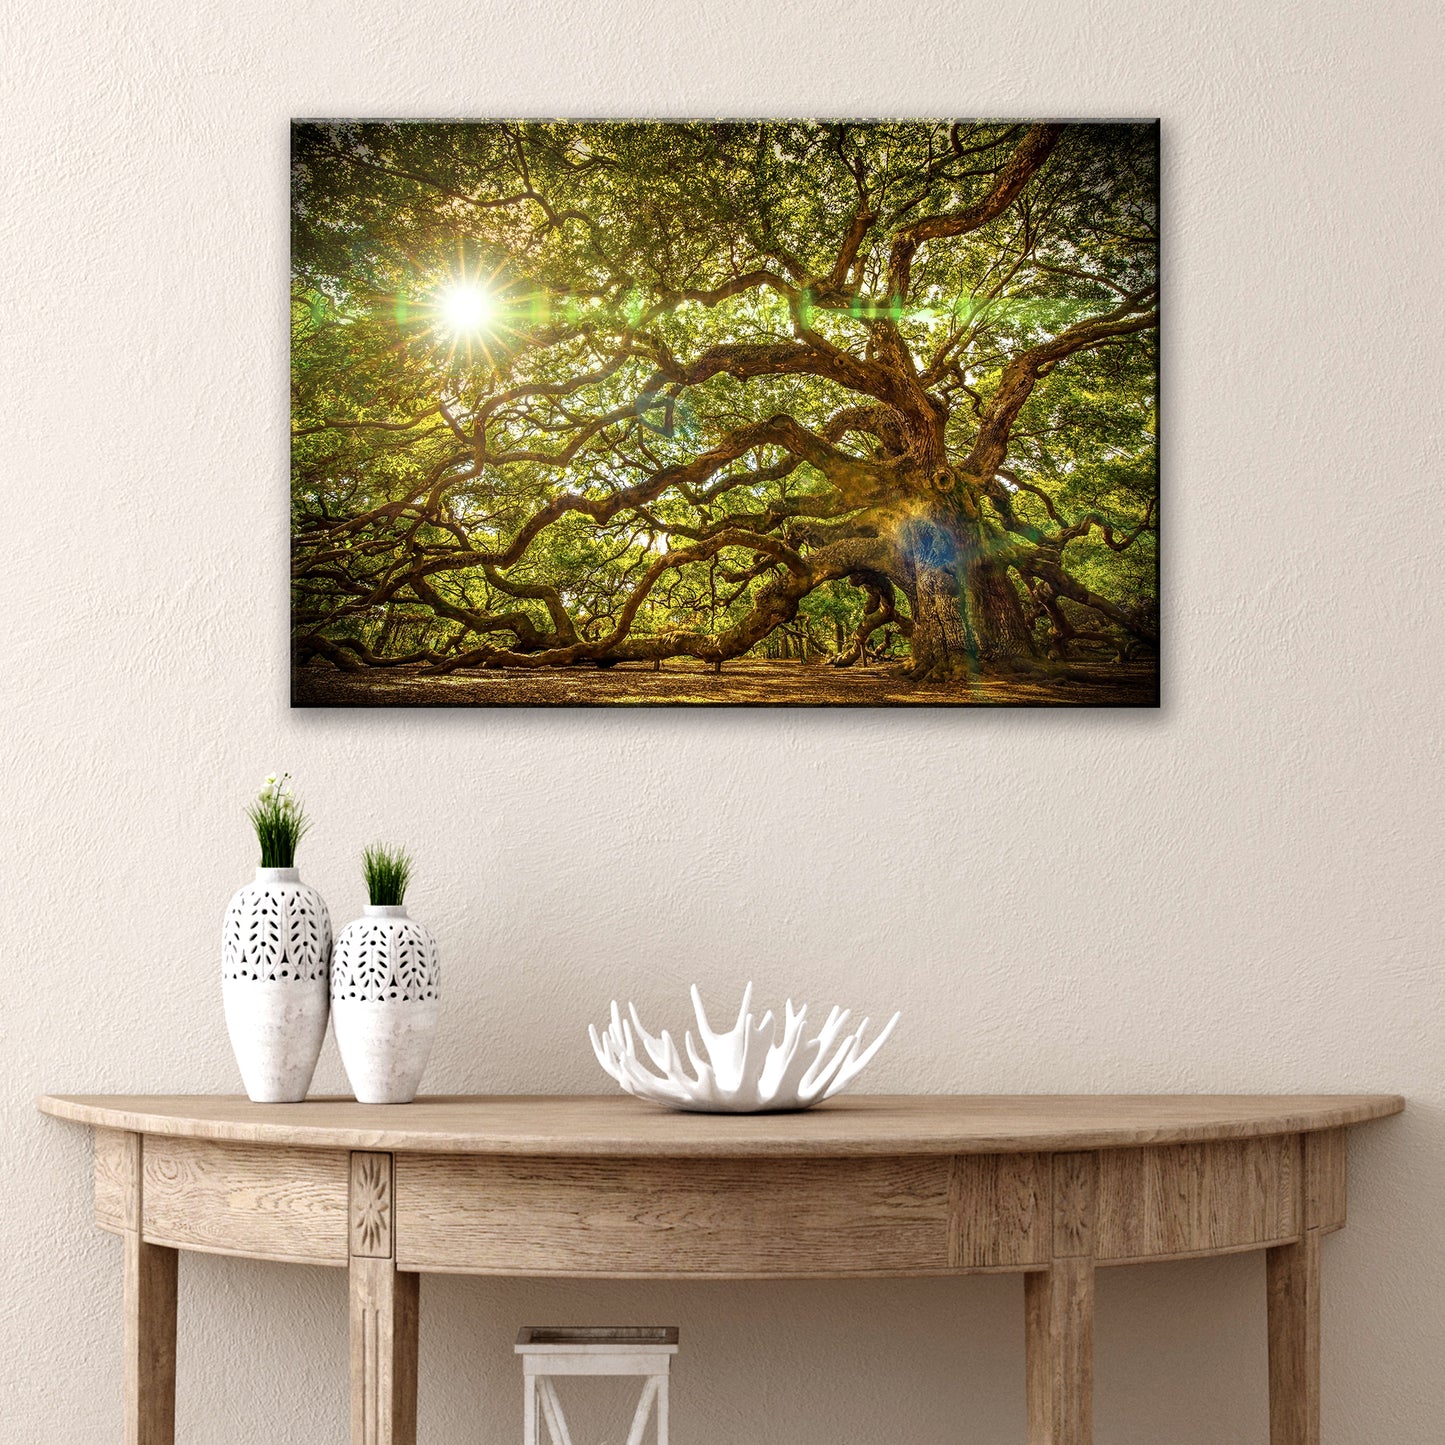 Angel Oak Tree Canvas Wall Art - Image by Tailored Canvases